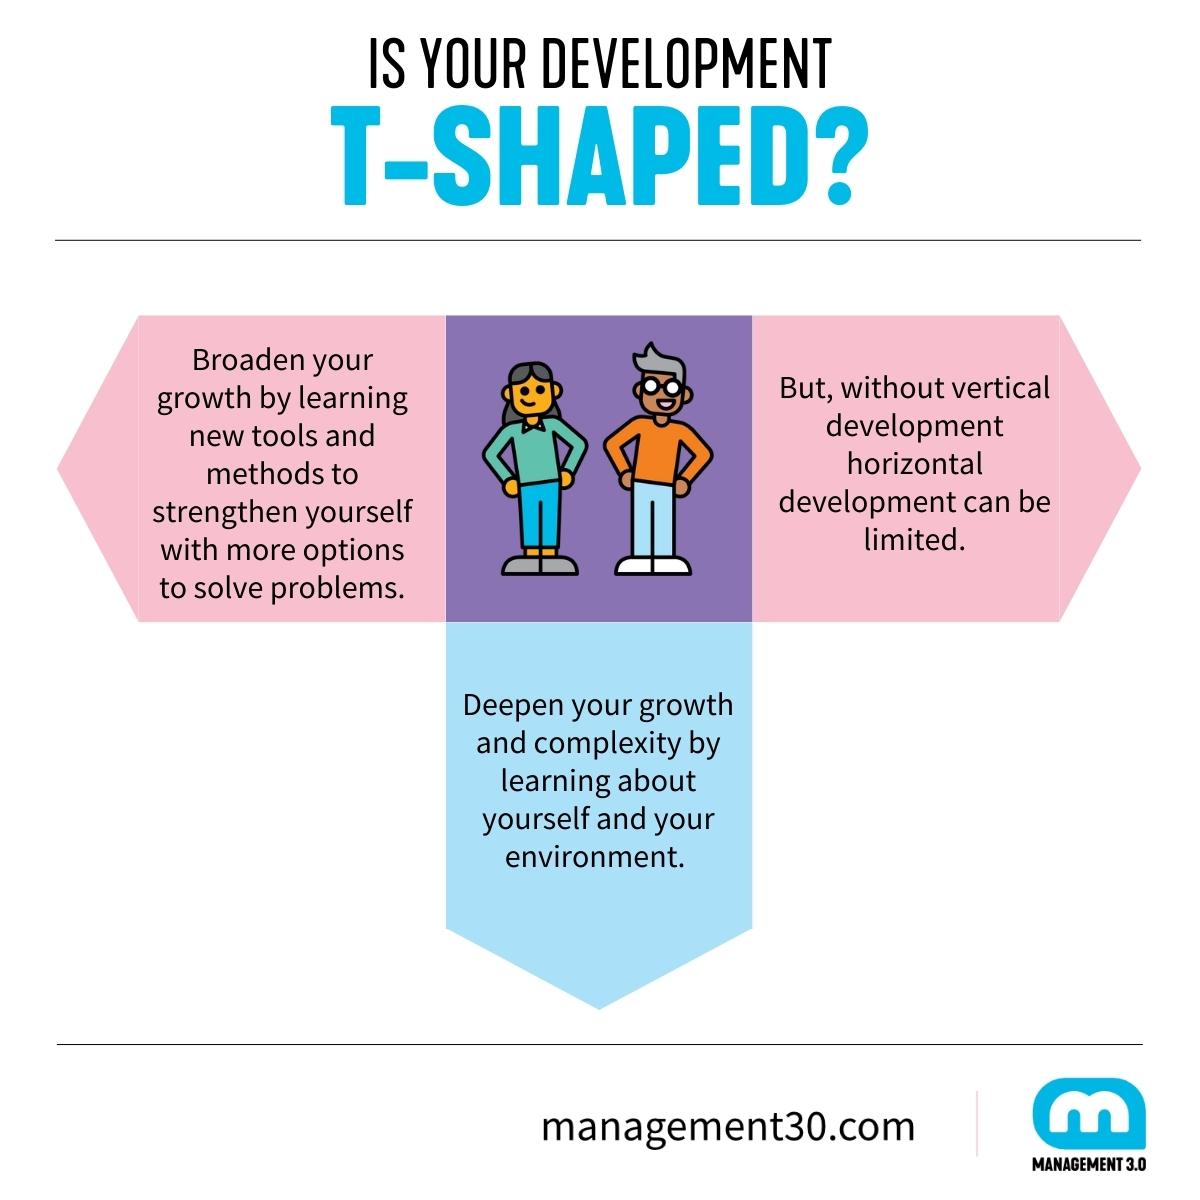 Is your development T-shaped?